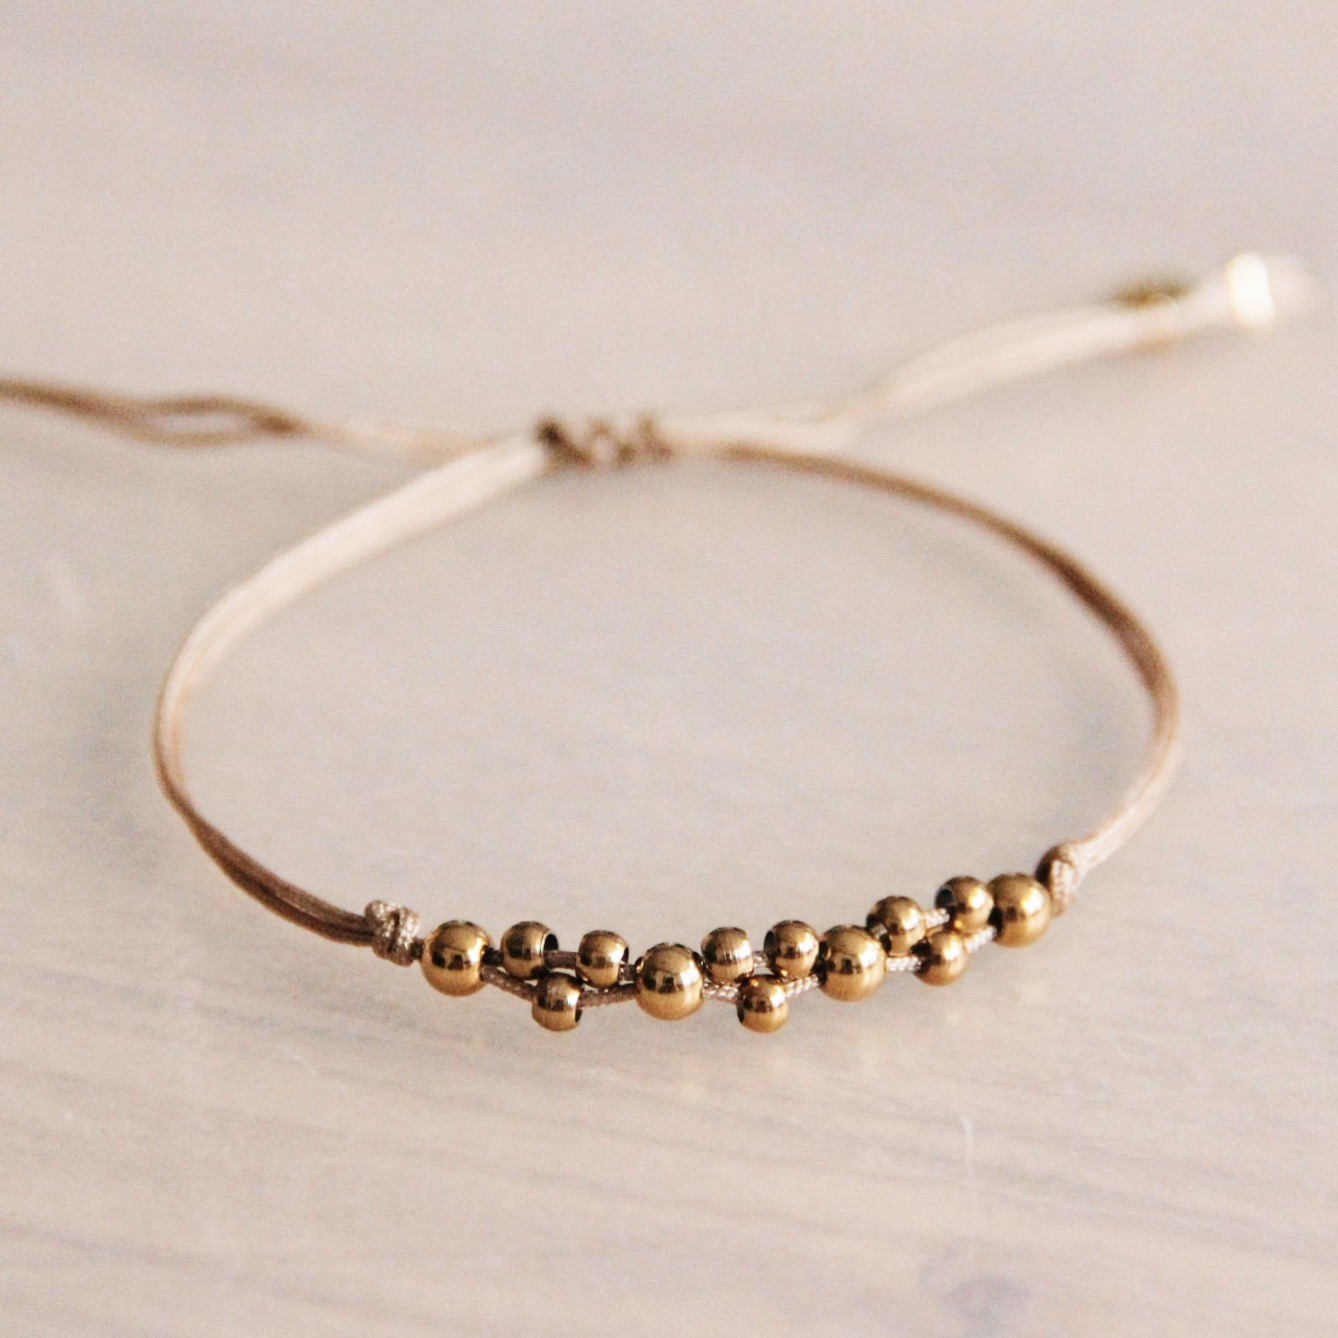 Satin Bracelet With Gold Colored Beads - Taupe / Gold